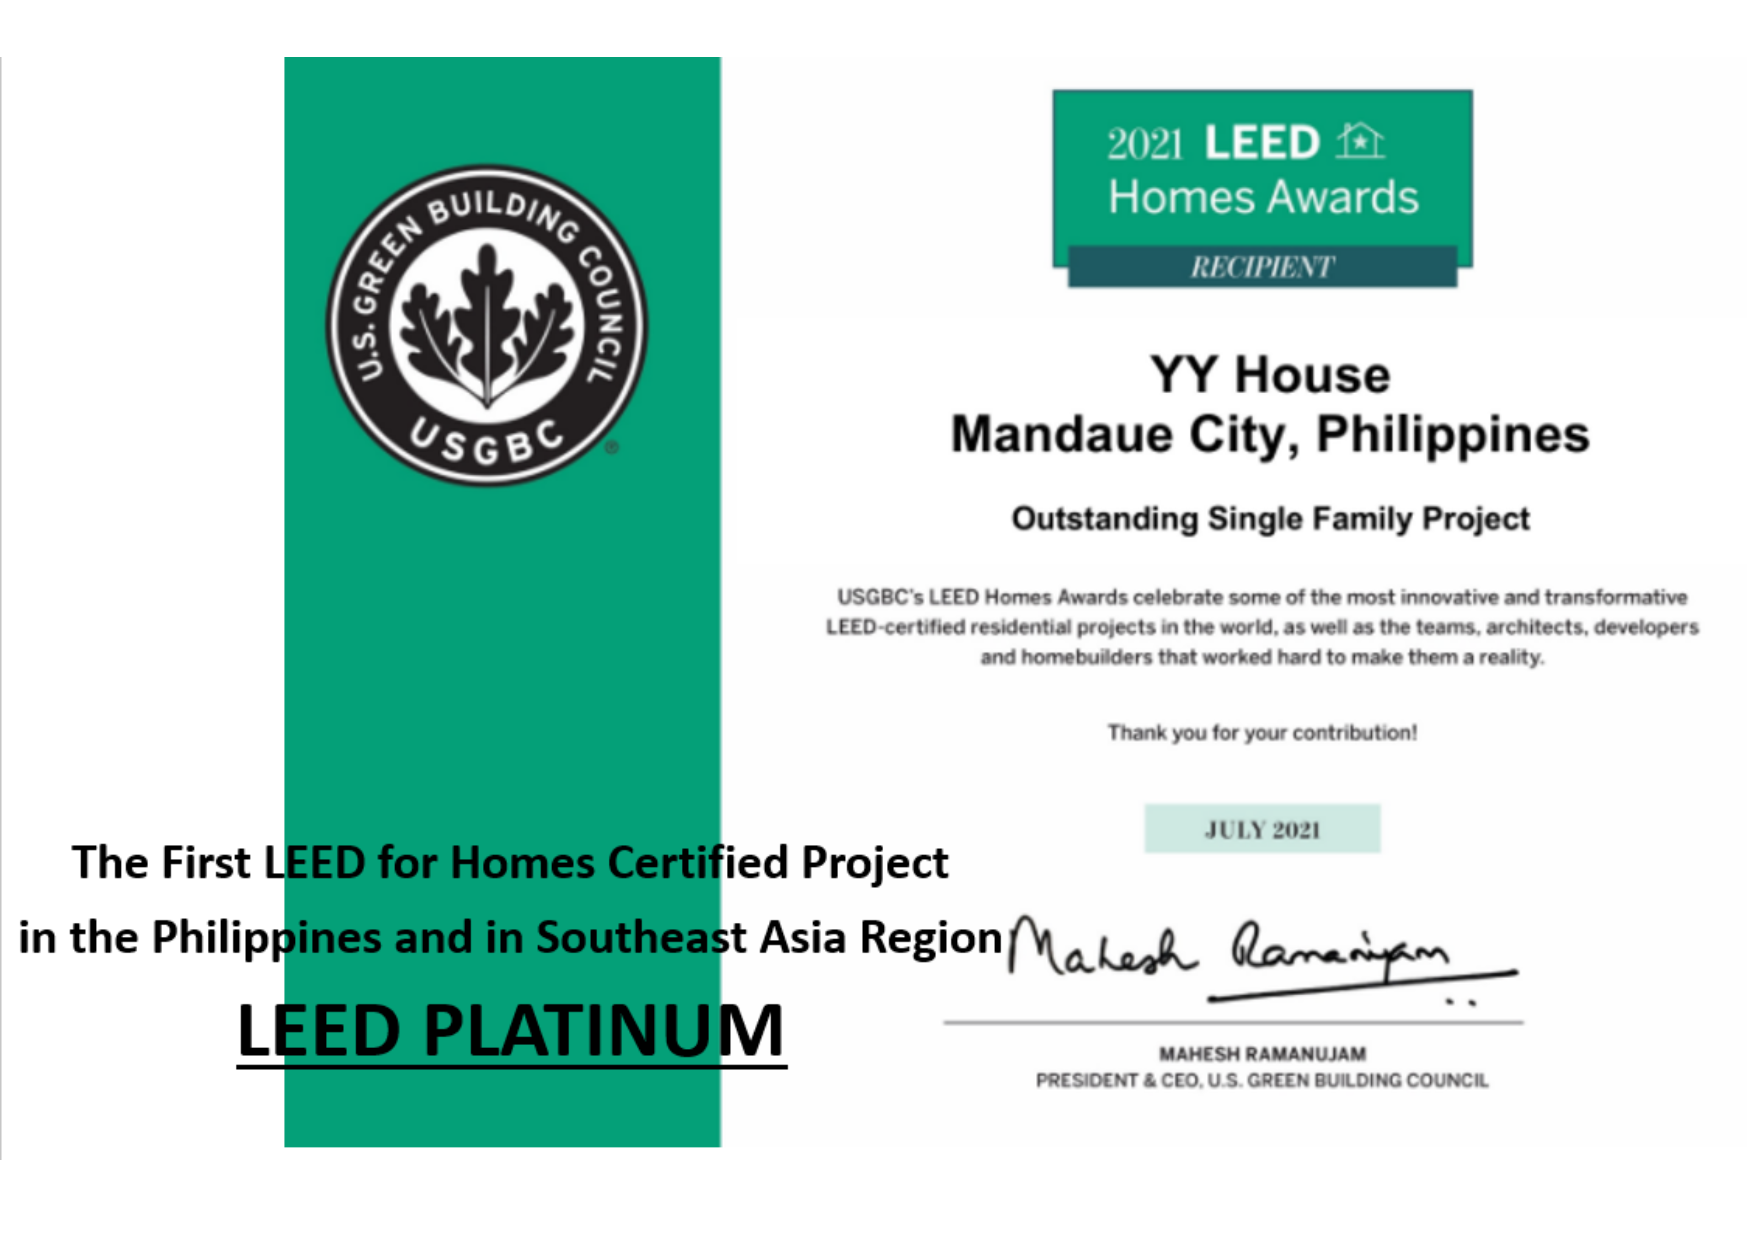 The First LEED for Homes Certified Project  in the Philippines and in Southeast Asia Region The U.S. Green Building Council has awarded YY House Mandaue City, Philippines as the outstanding single family project which use AAC LightStrong Block for their wall system.